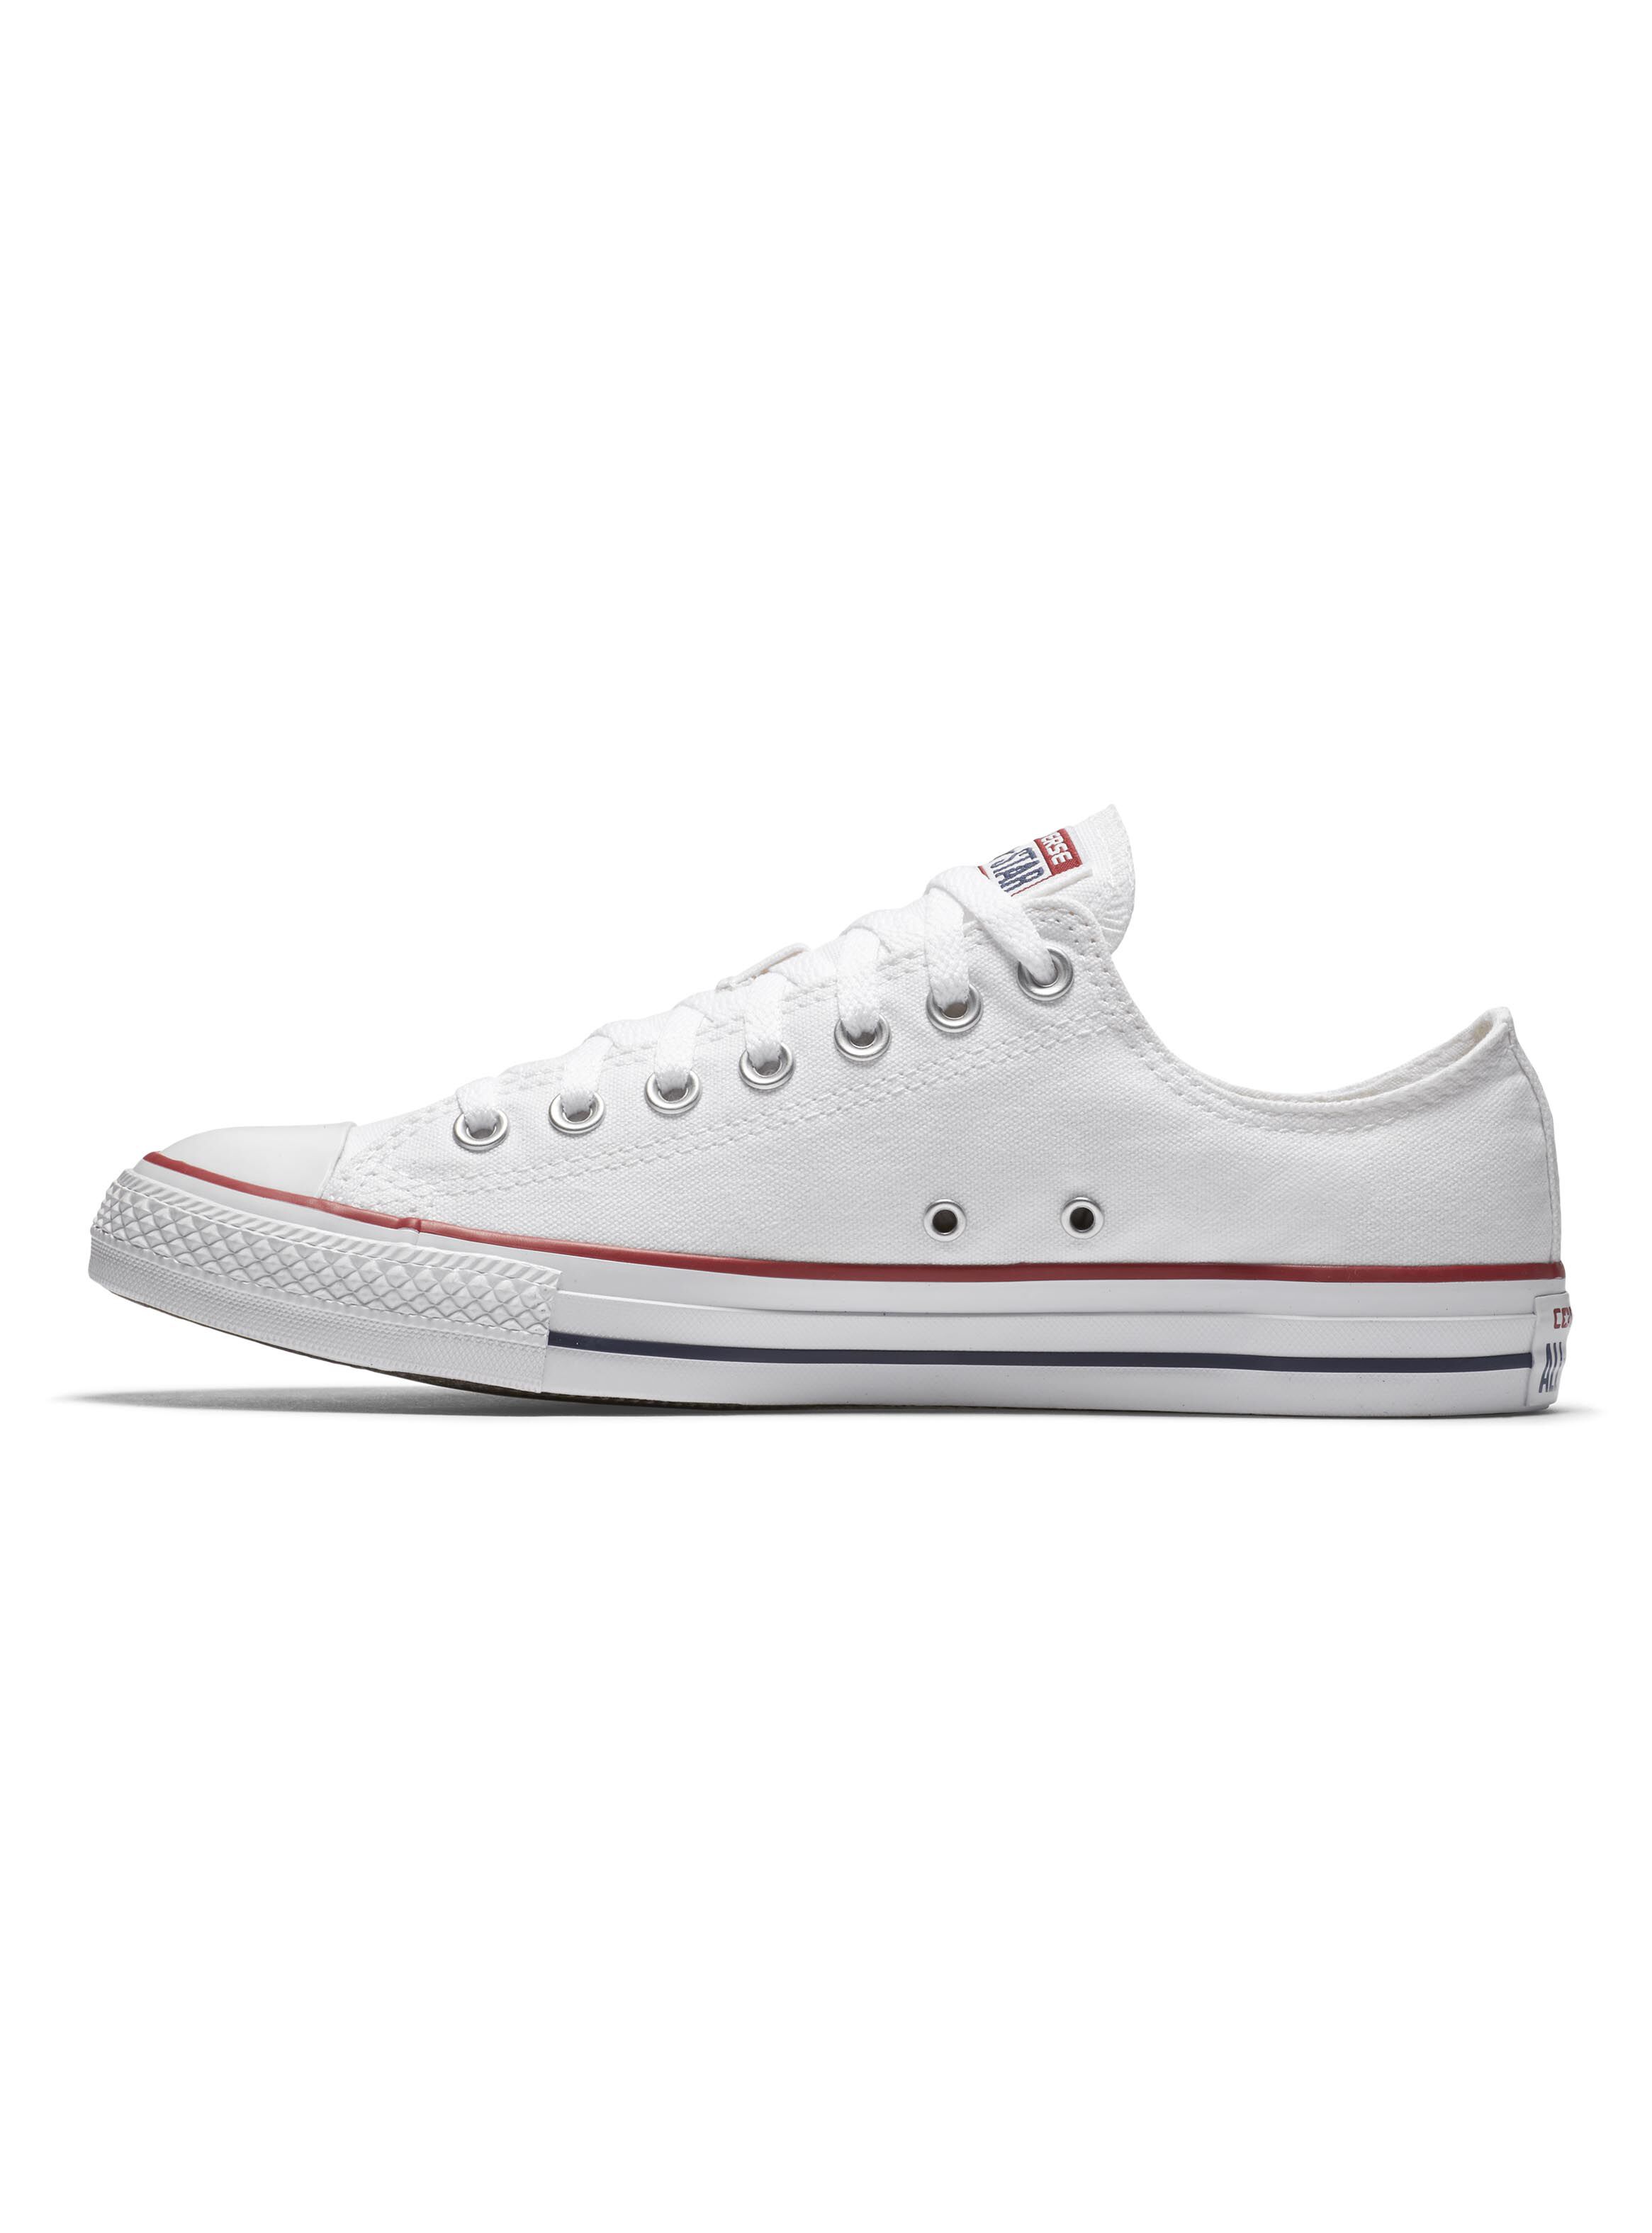 converse all star color jeans